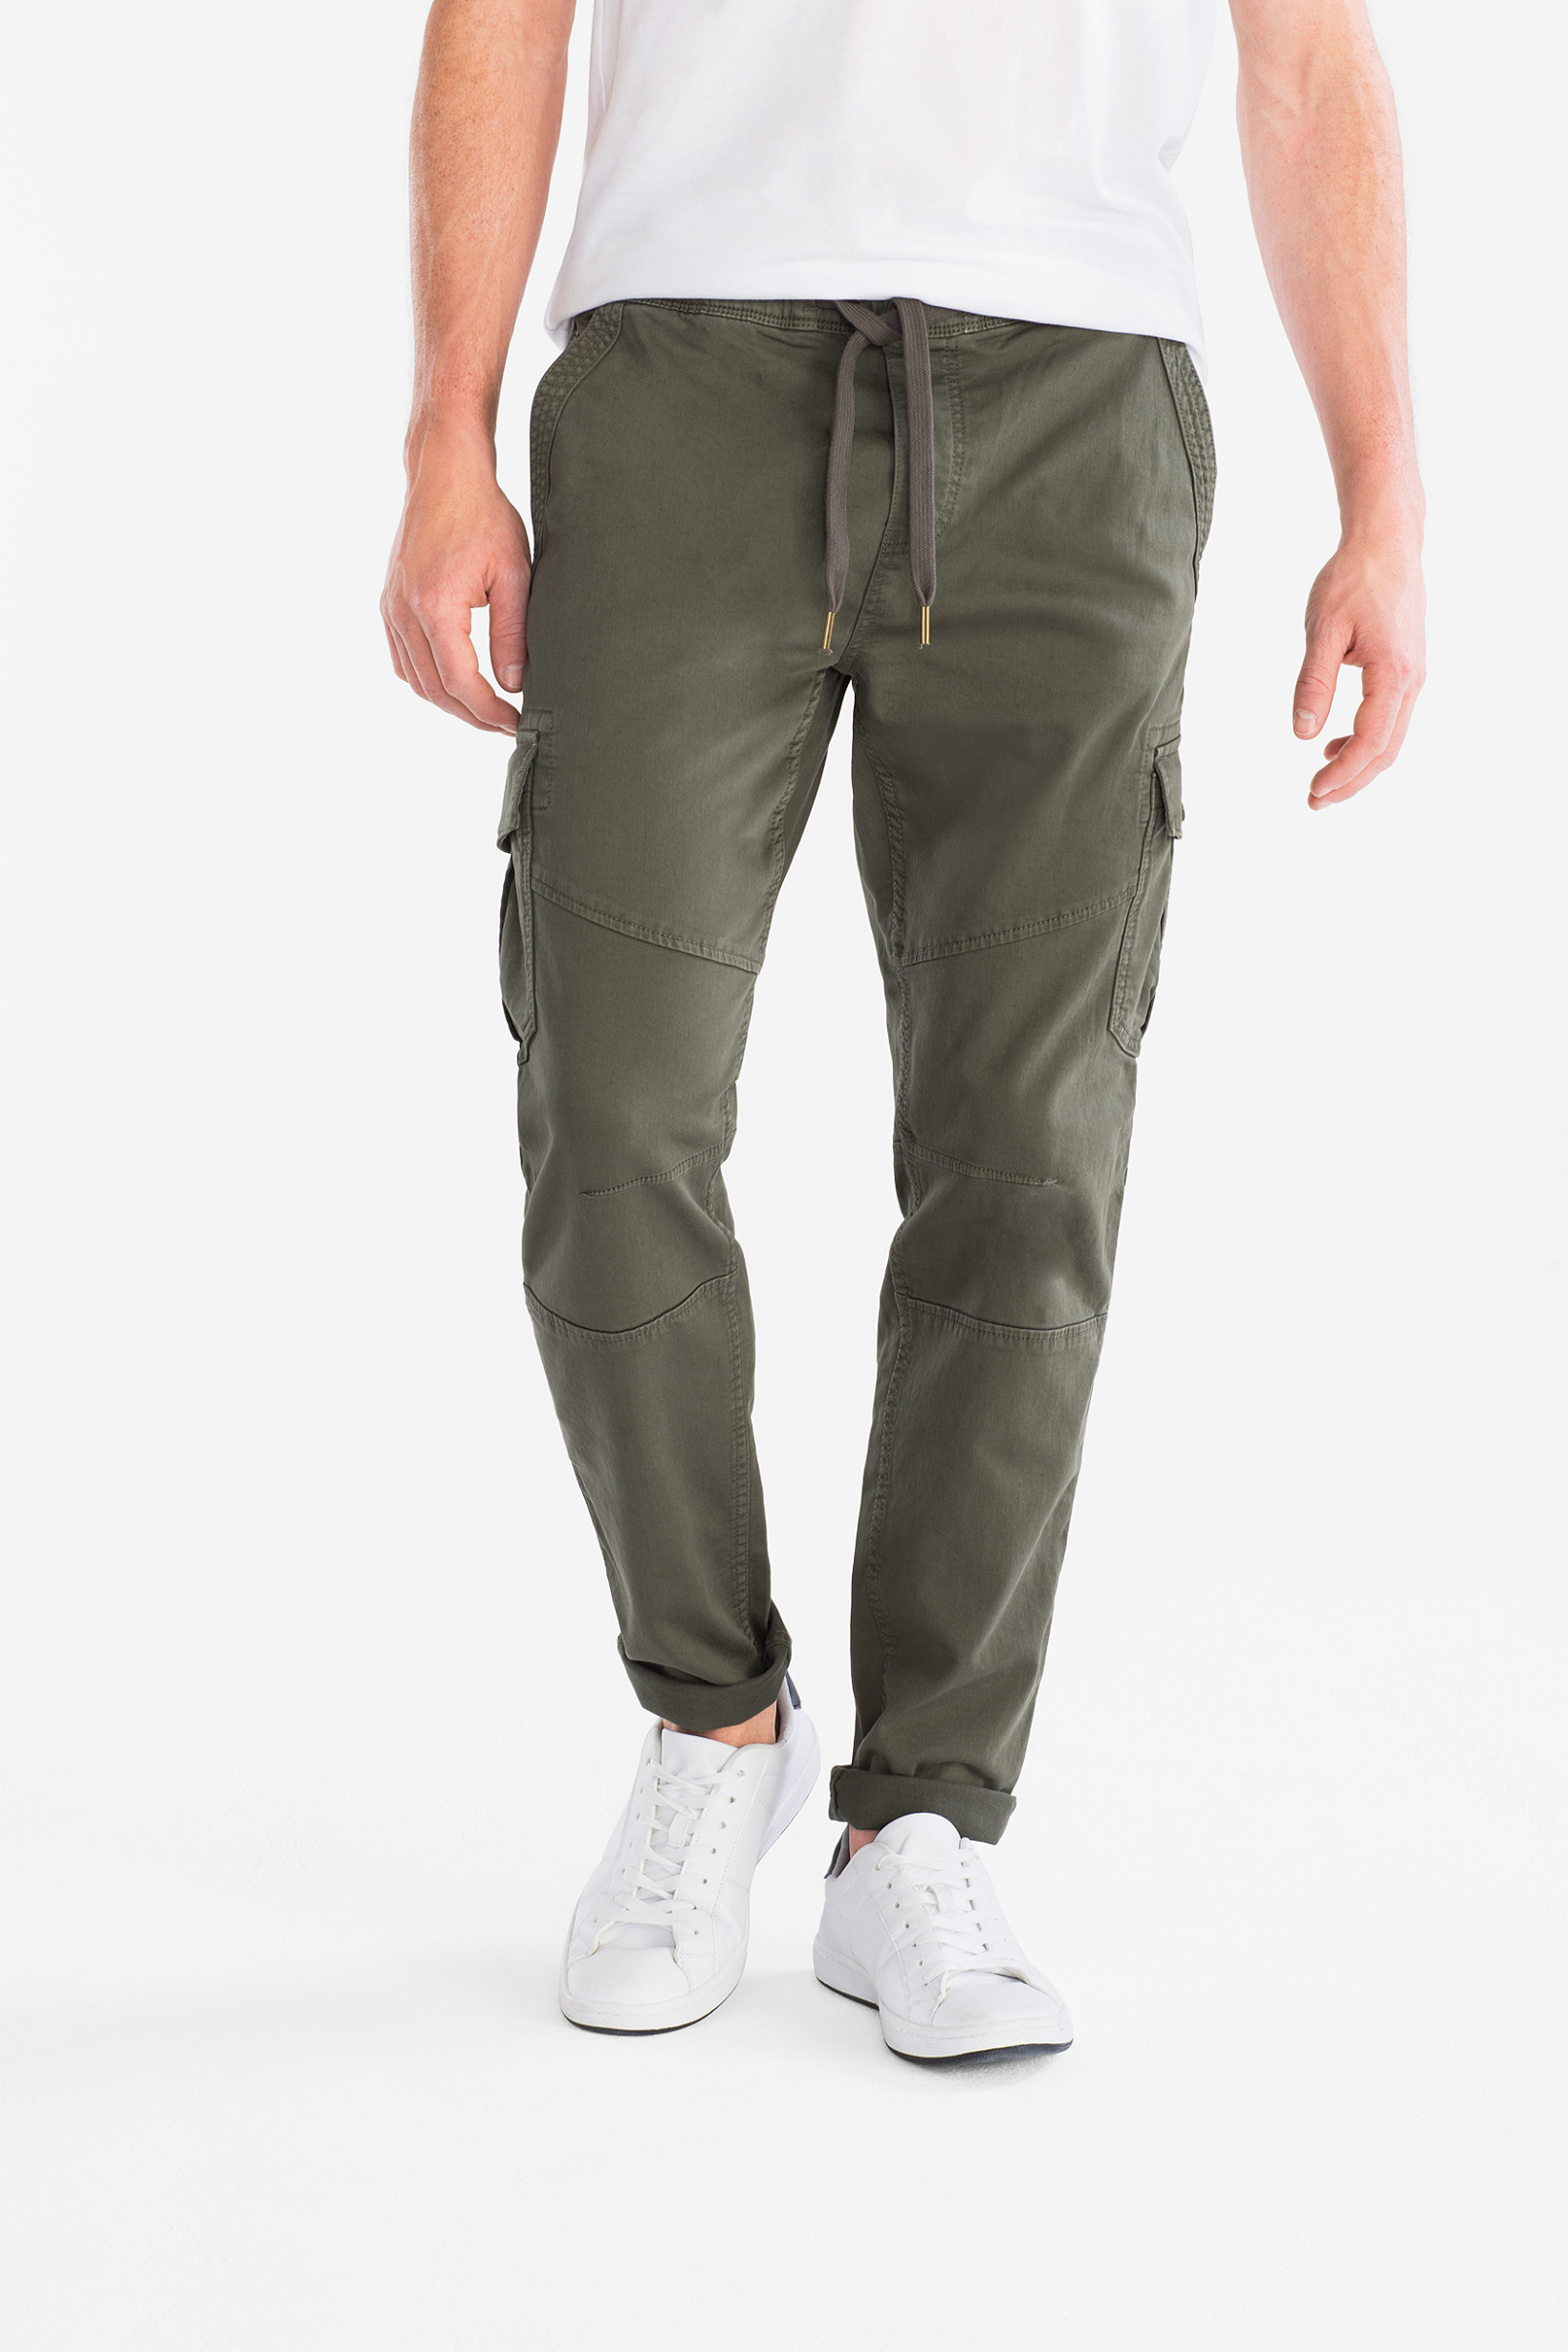 Angelo Litrico Cargobroek Tapered Fit